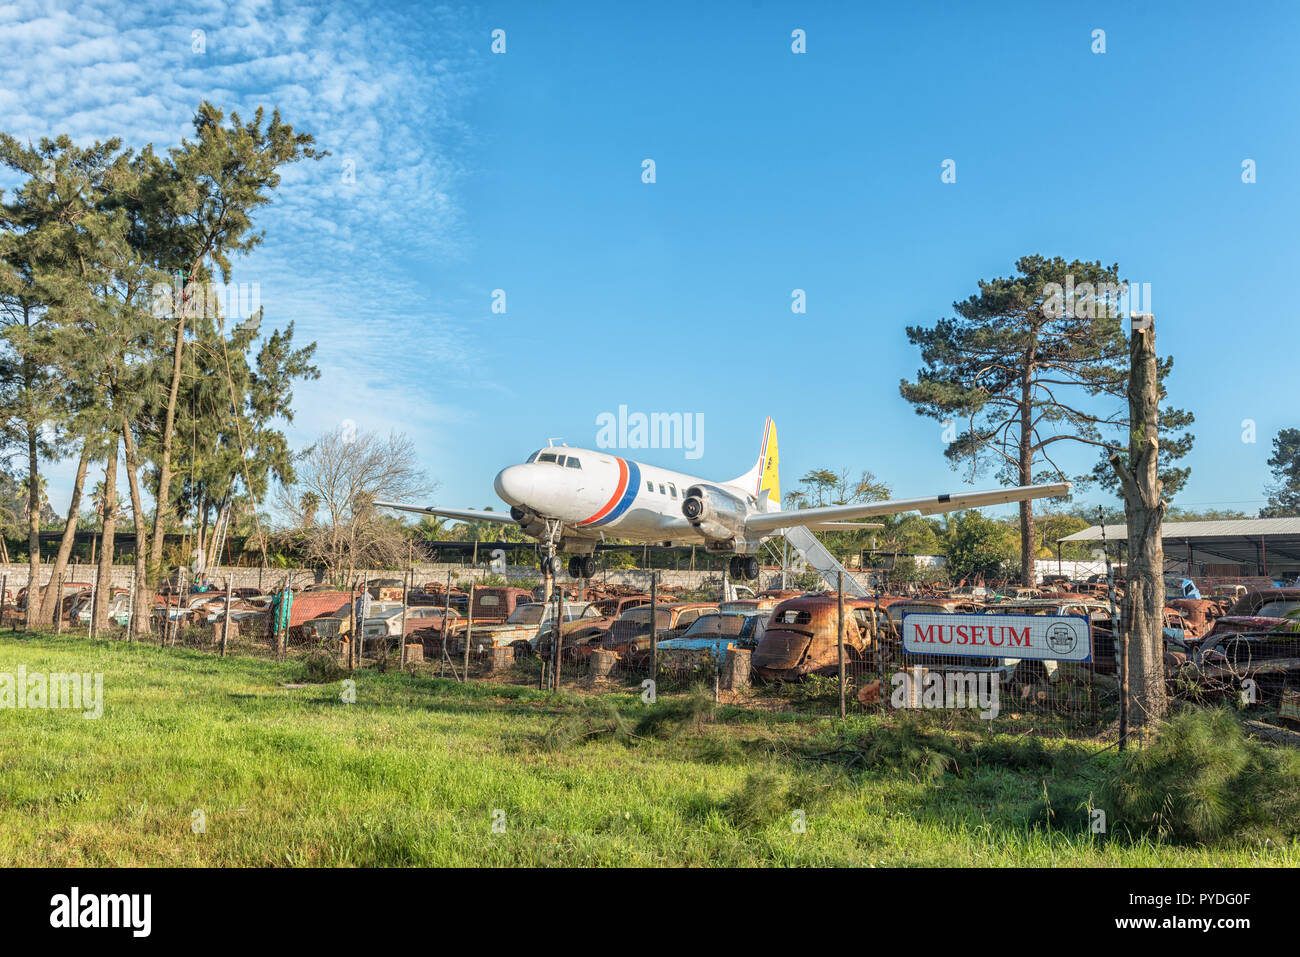 BELLVILLE, SOUTH AFRICA, AUGUST 15, 2018: A Convair Aeroplane and vintage cars waiting to be restored at the Wijnland Auto Museum near Bellville in th Stock Photo